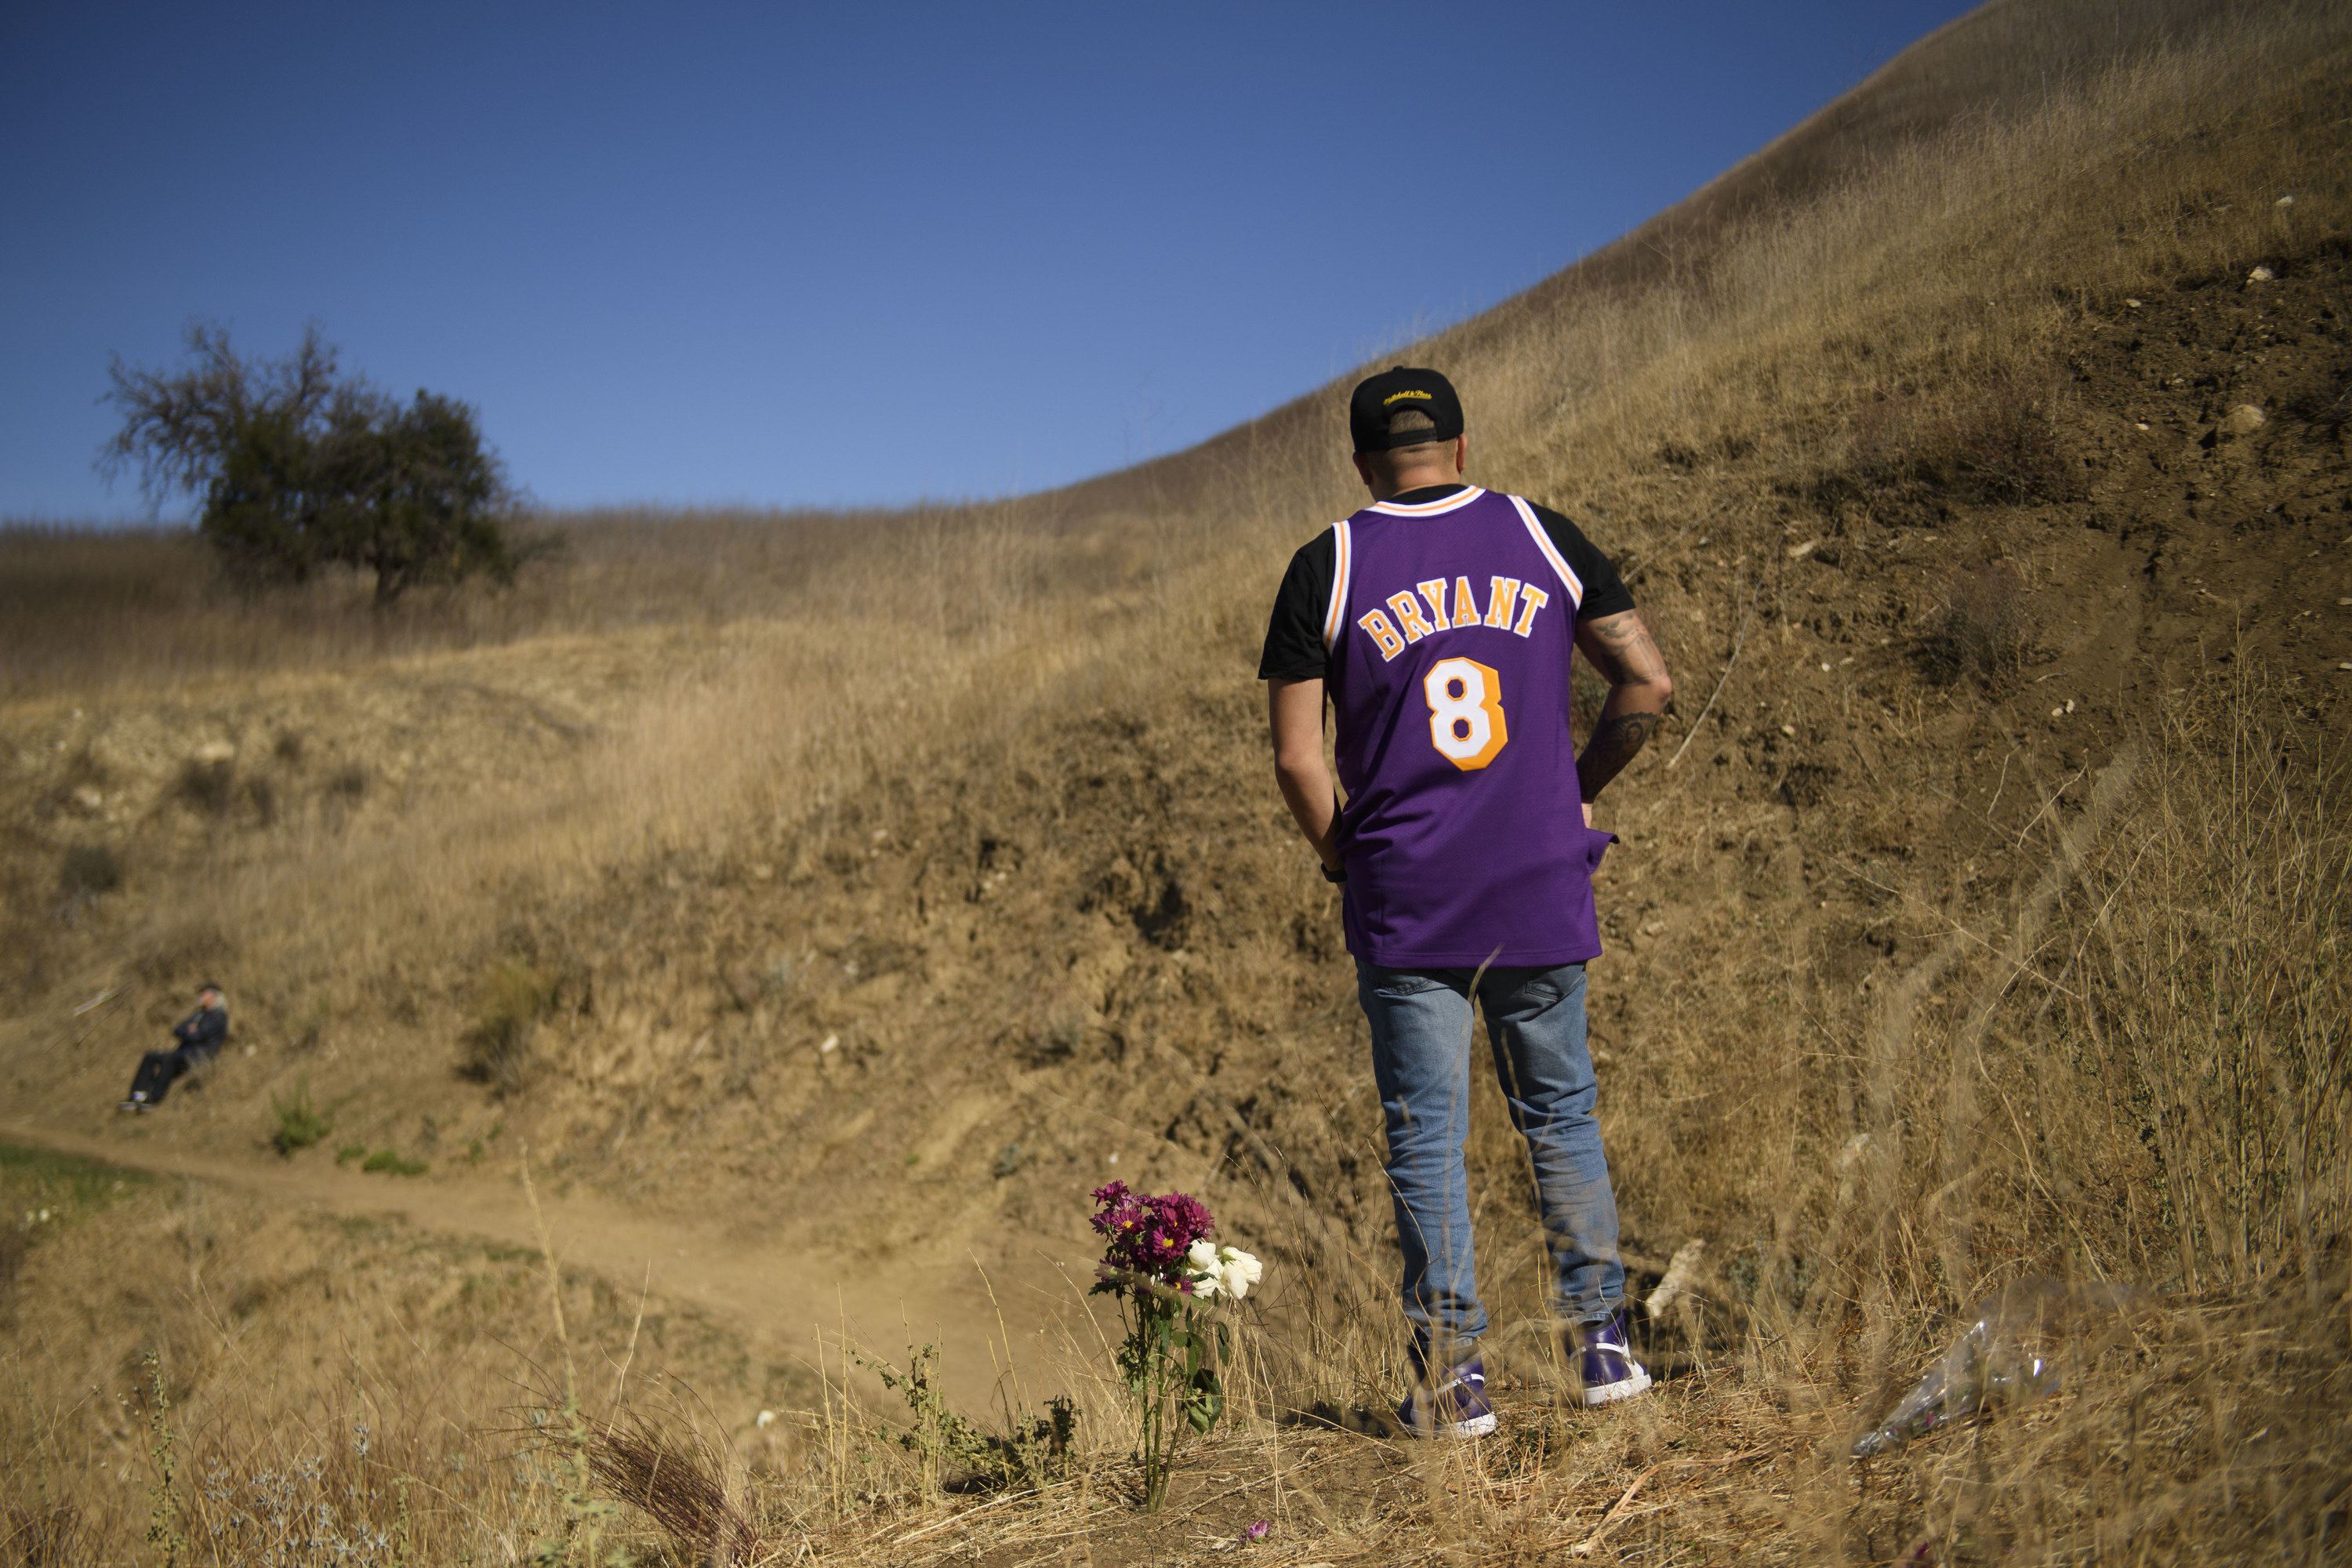 Anthony Calderon leaves flowers to pay his respects at a makeshift memorial on January 26, 2021 in Calabasas, California, at the hillside site of a helicopter crash.